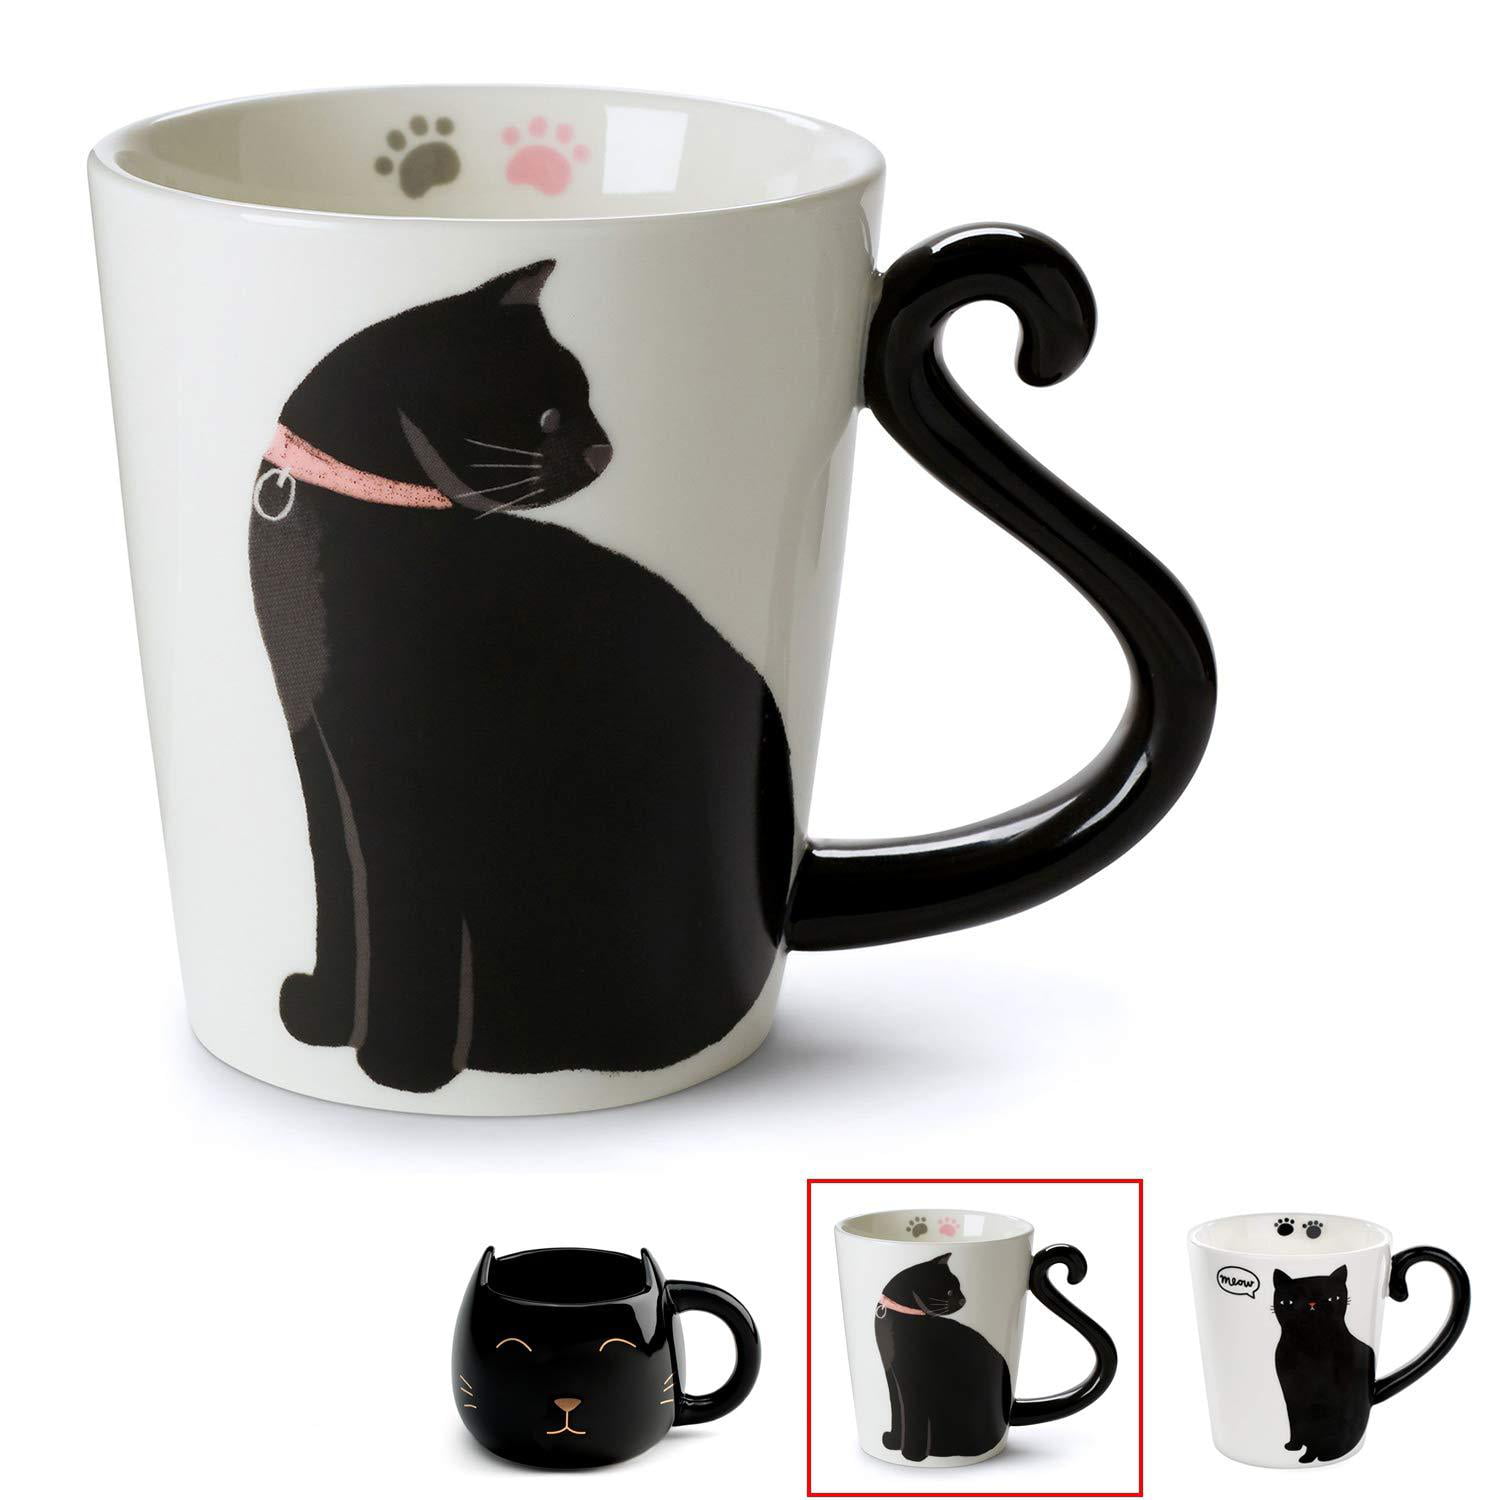 Cute Cat Mug for Coffee or Tea Ceramic Cup for Cat Lovers with Black